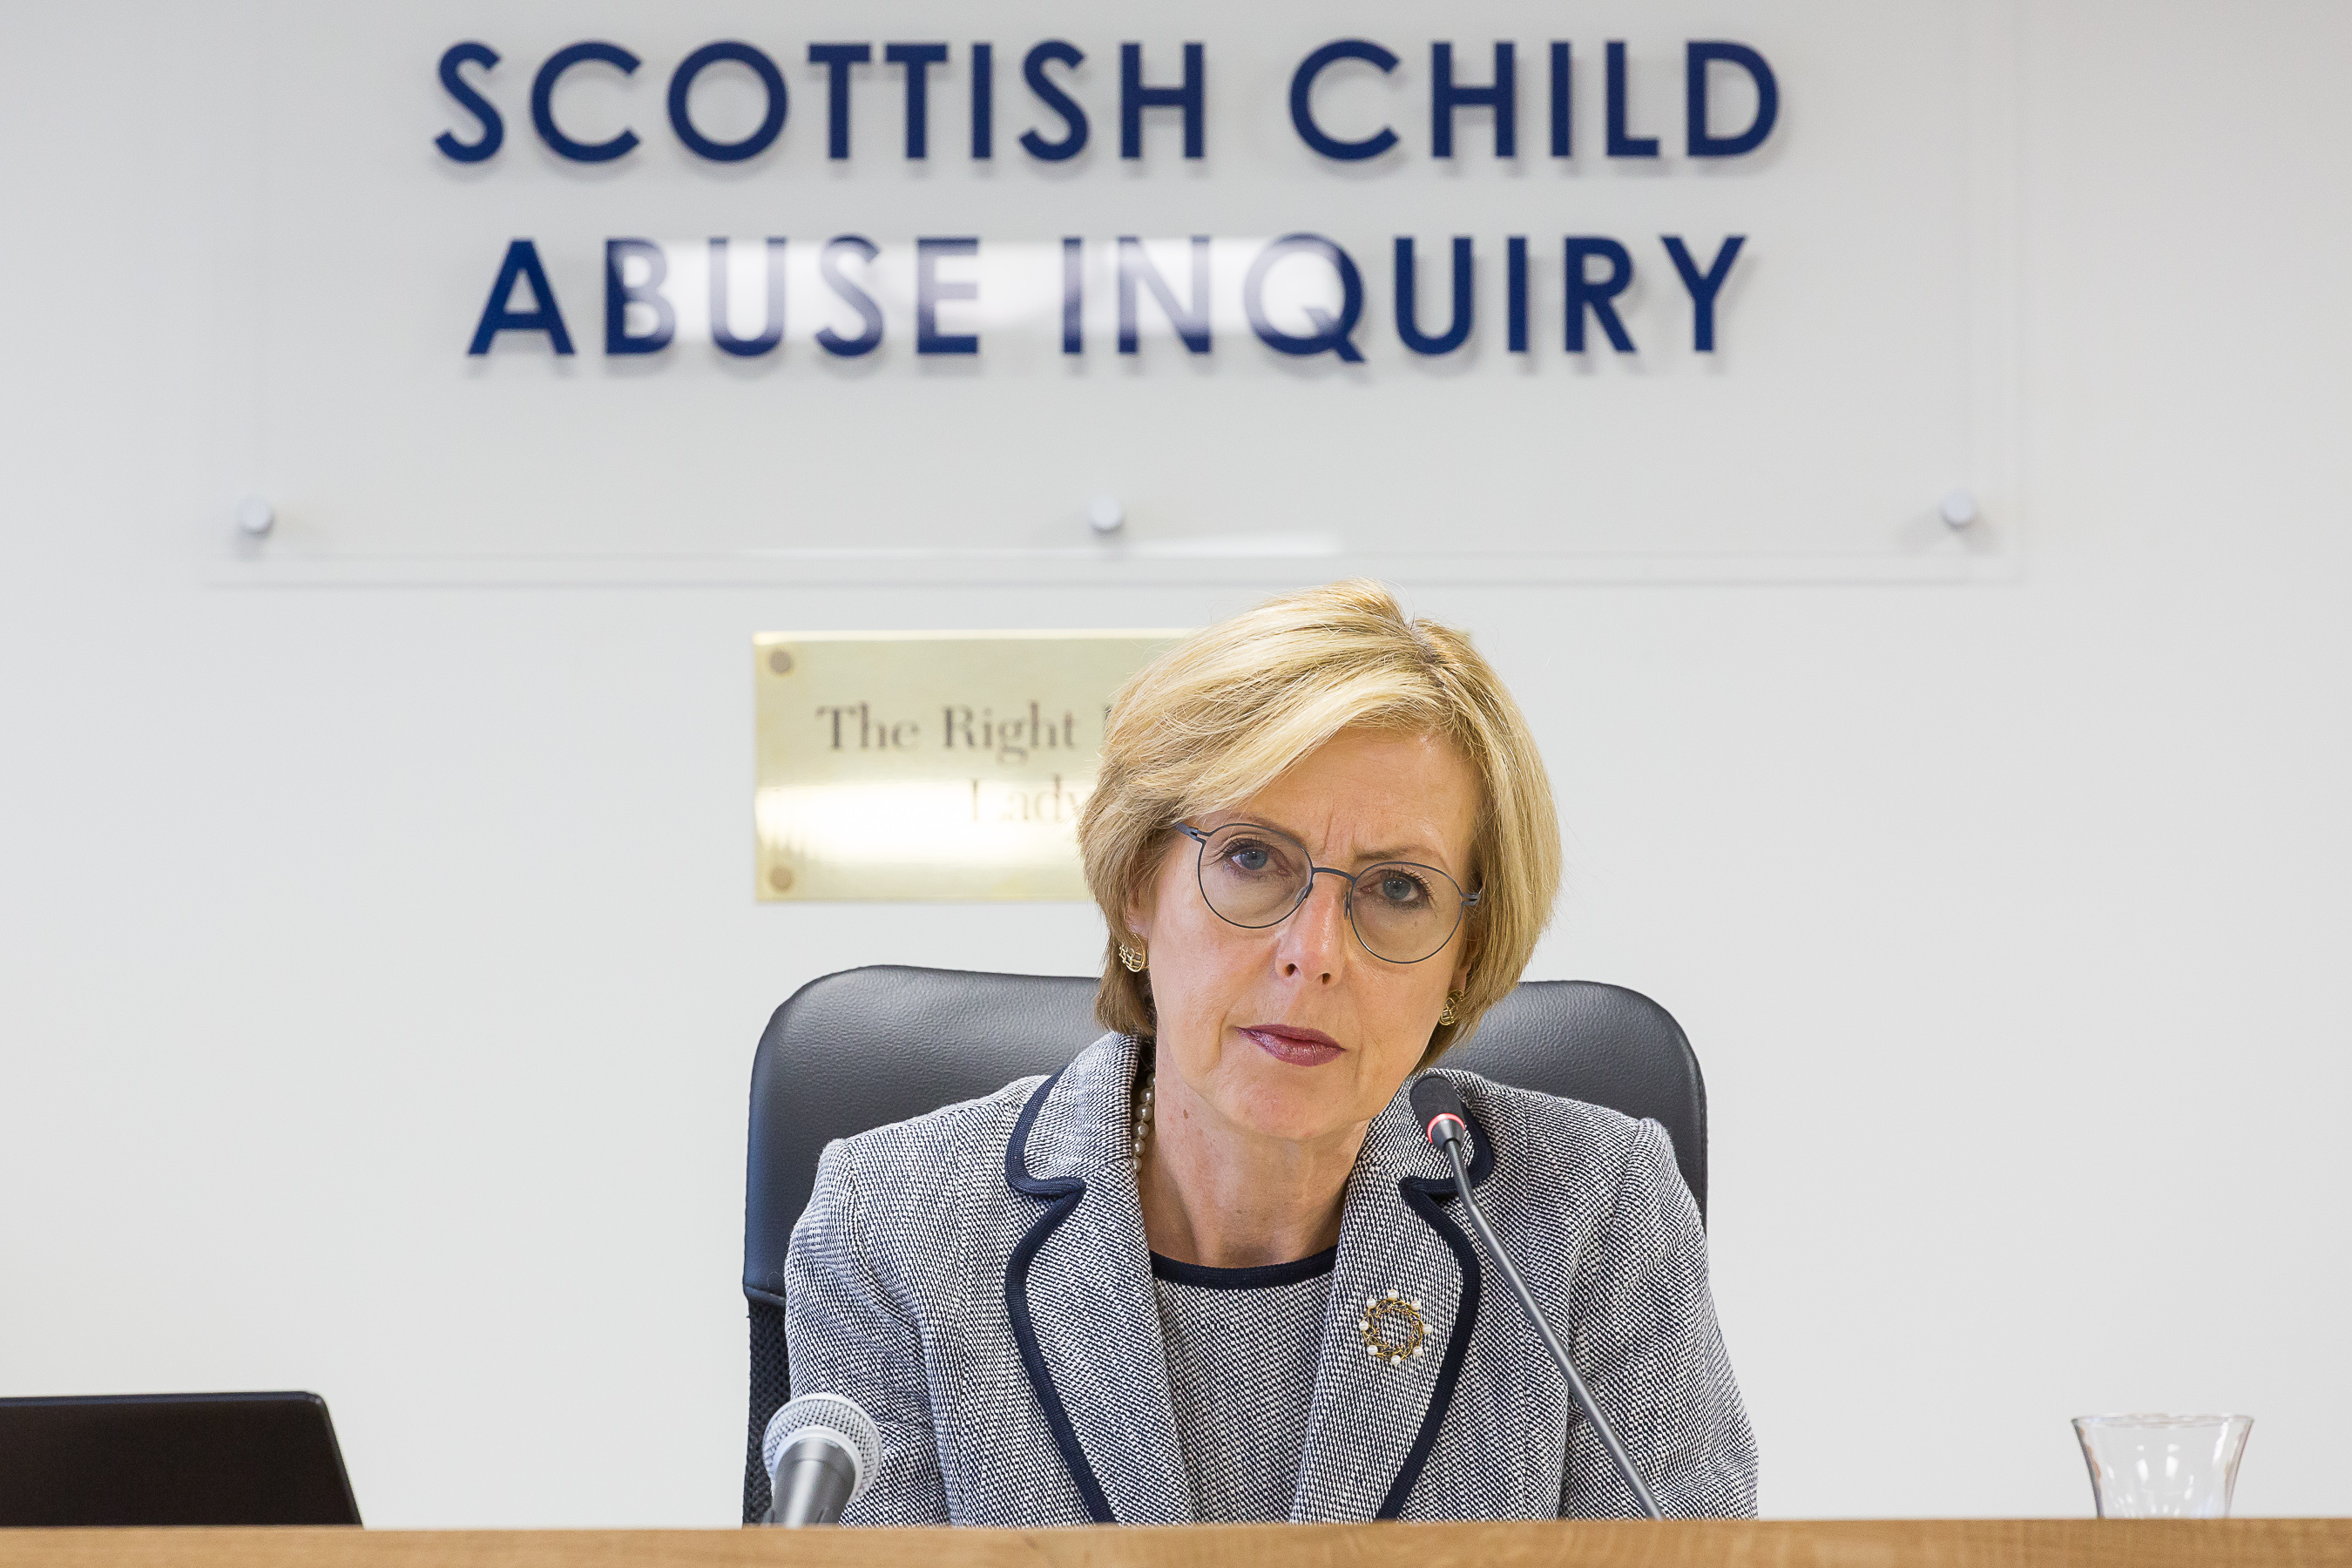 Lady Smith, Chair of the Scottish Child Abuse Inquiry (Nick Mailer)